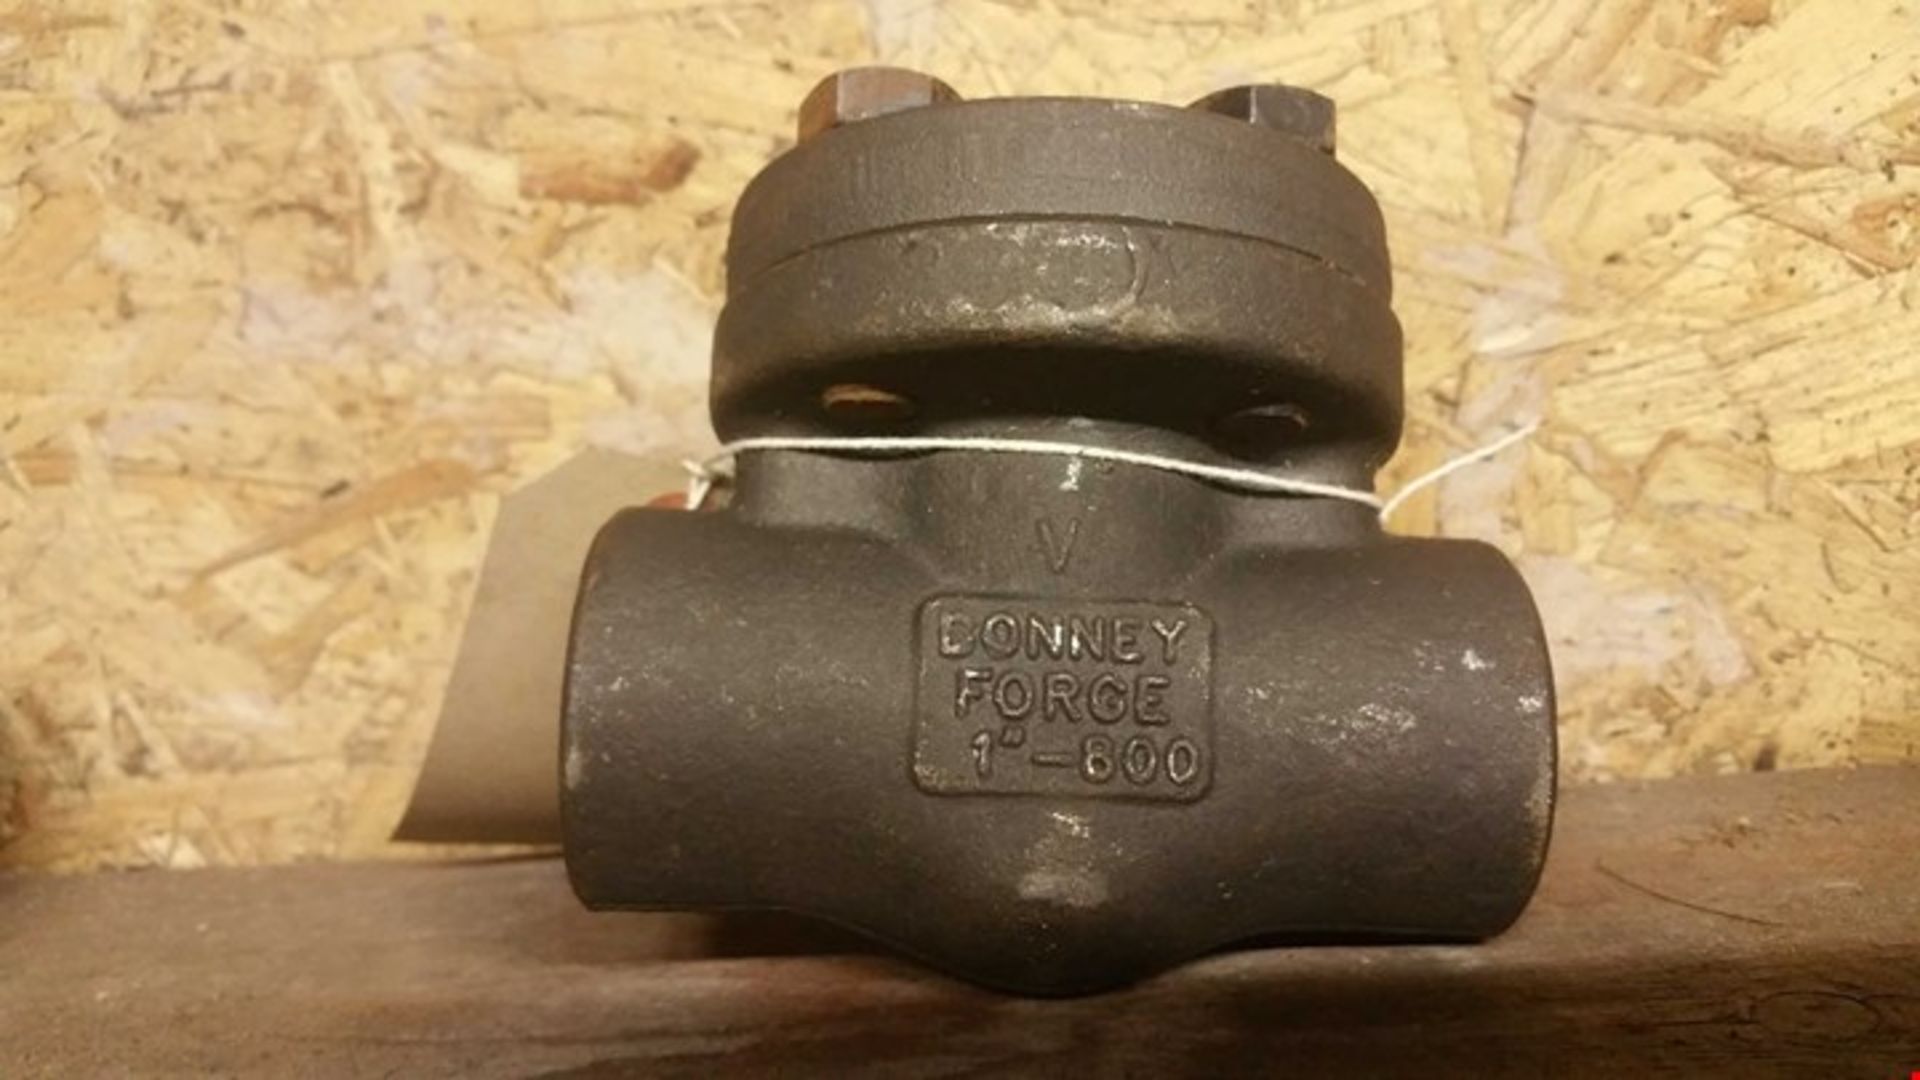 R45NB100 BR305 1 FORGED STEEL CHECK VALVE RRP Â£135.00